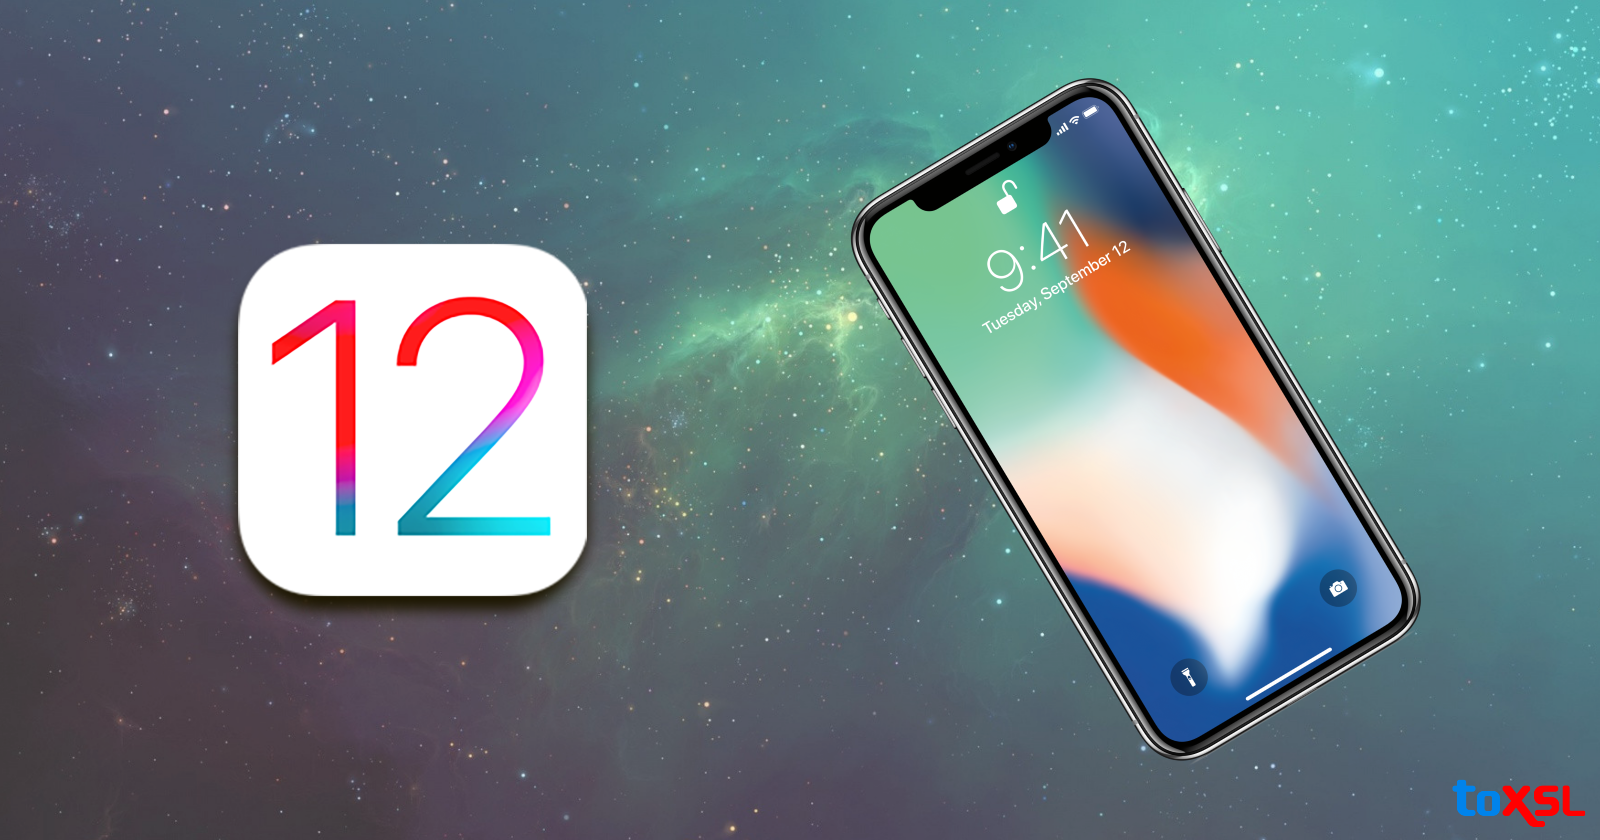 iOS 12 is available now: Read Here to Know What's New